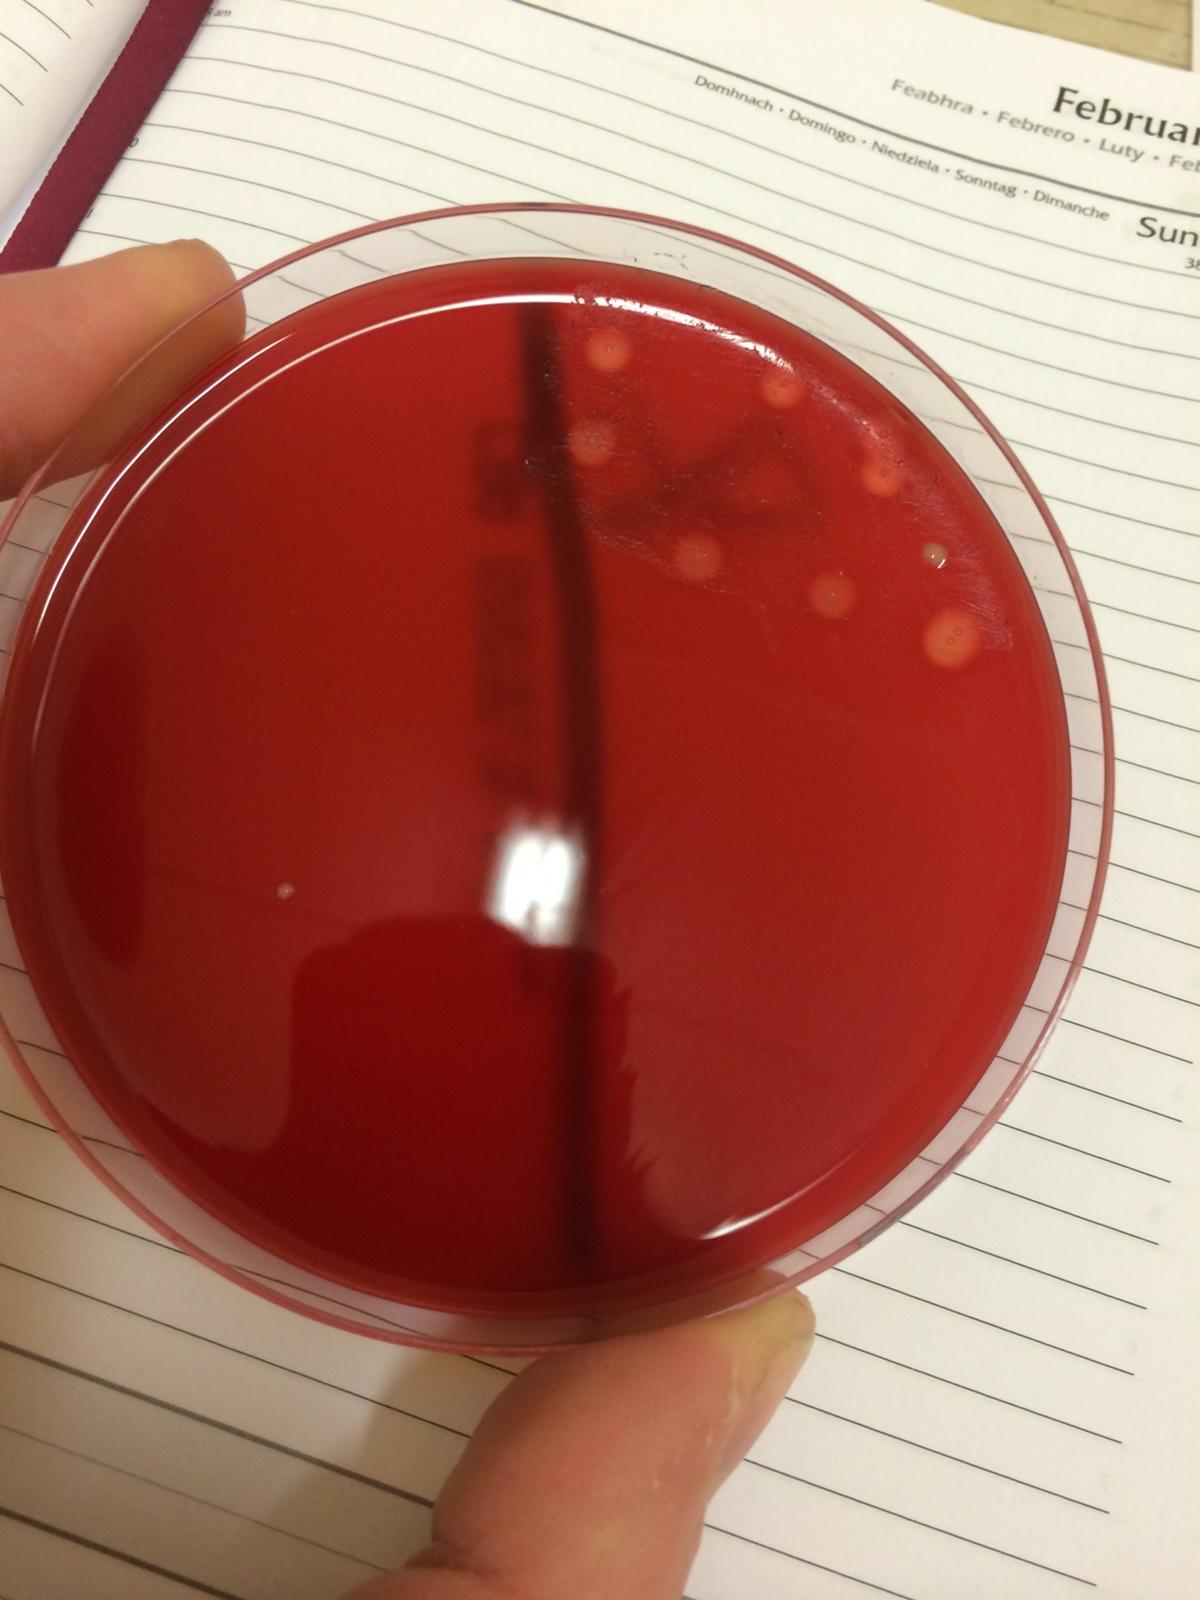 Microbiology- bacterial culture